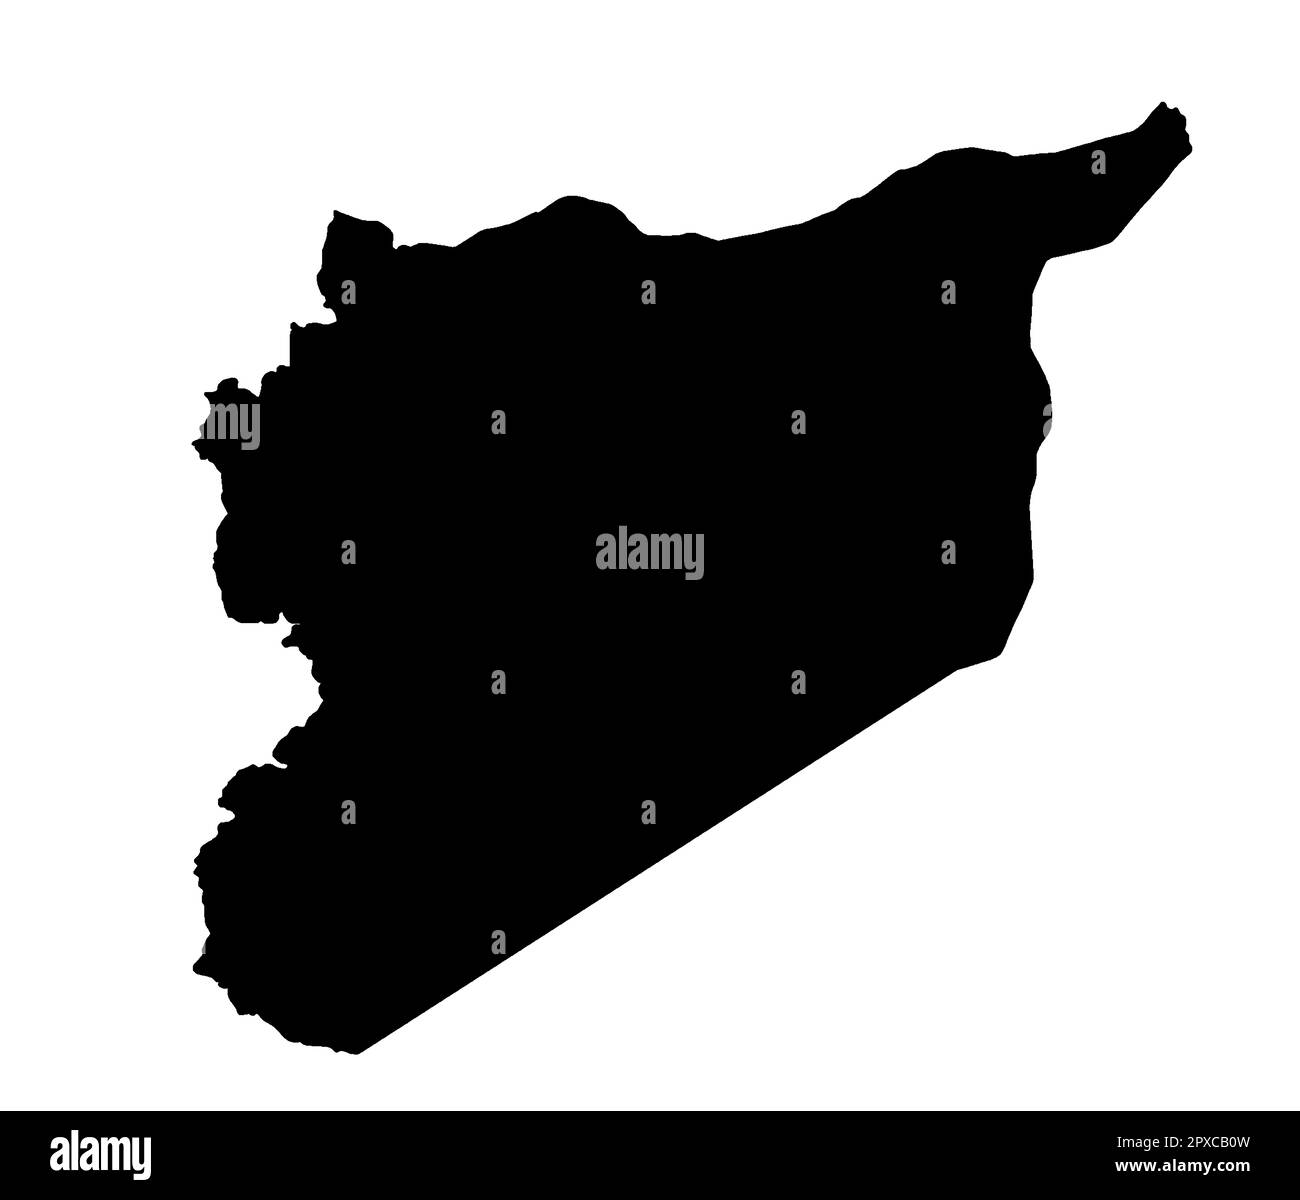 Outline silhouette map of Syria over a white background Stock Photo